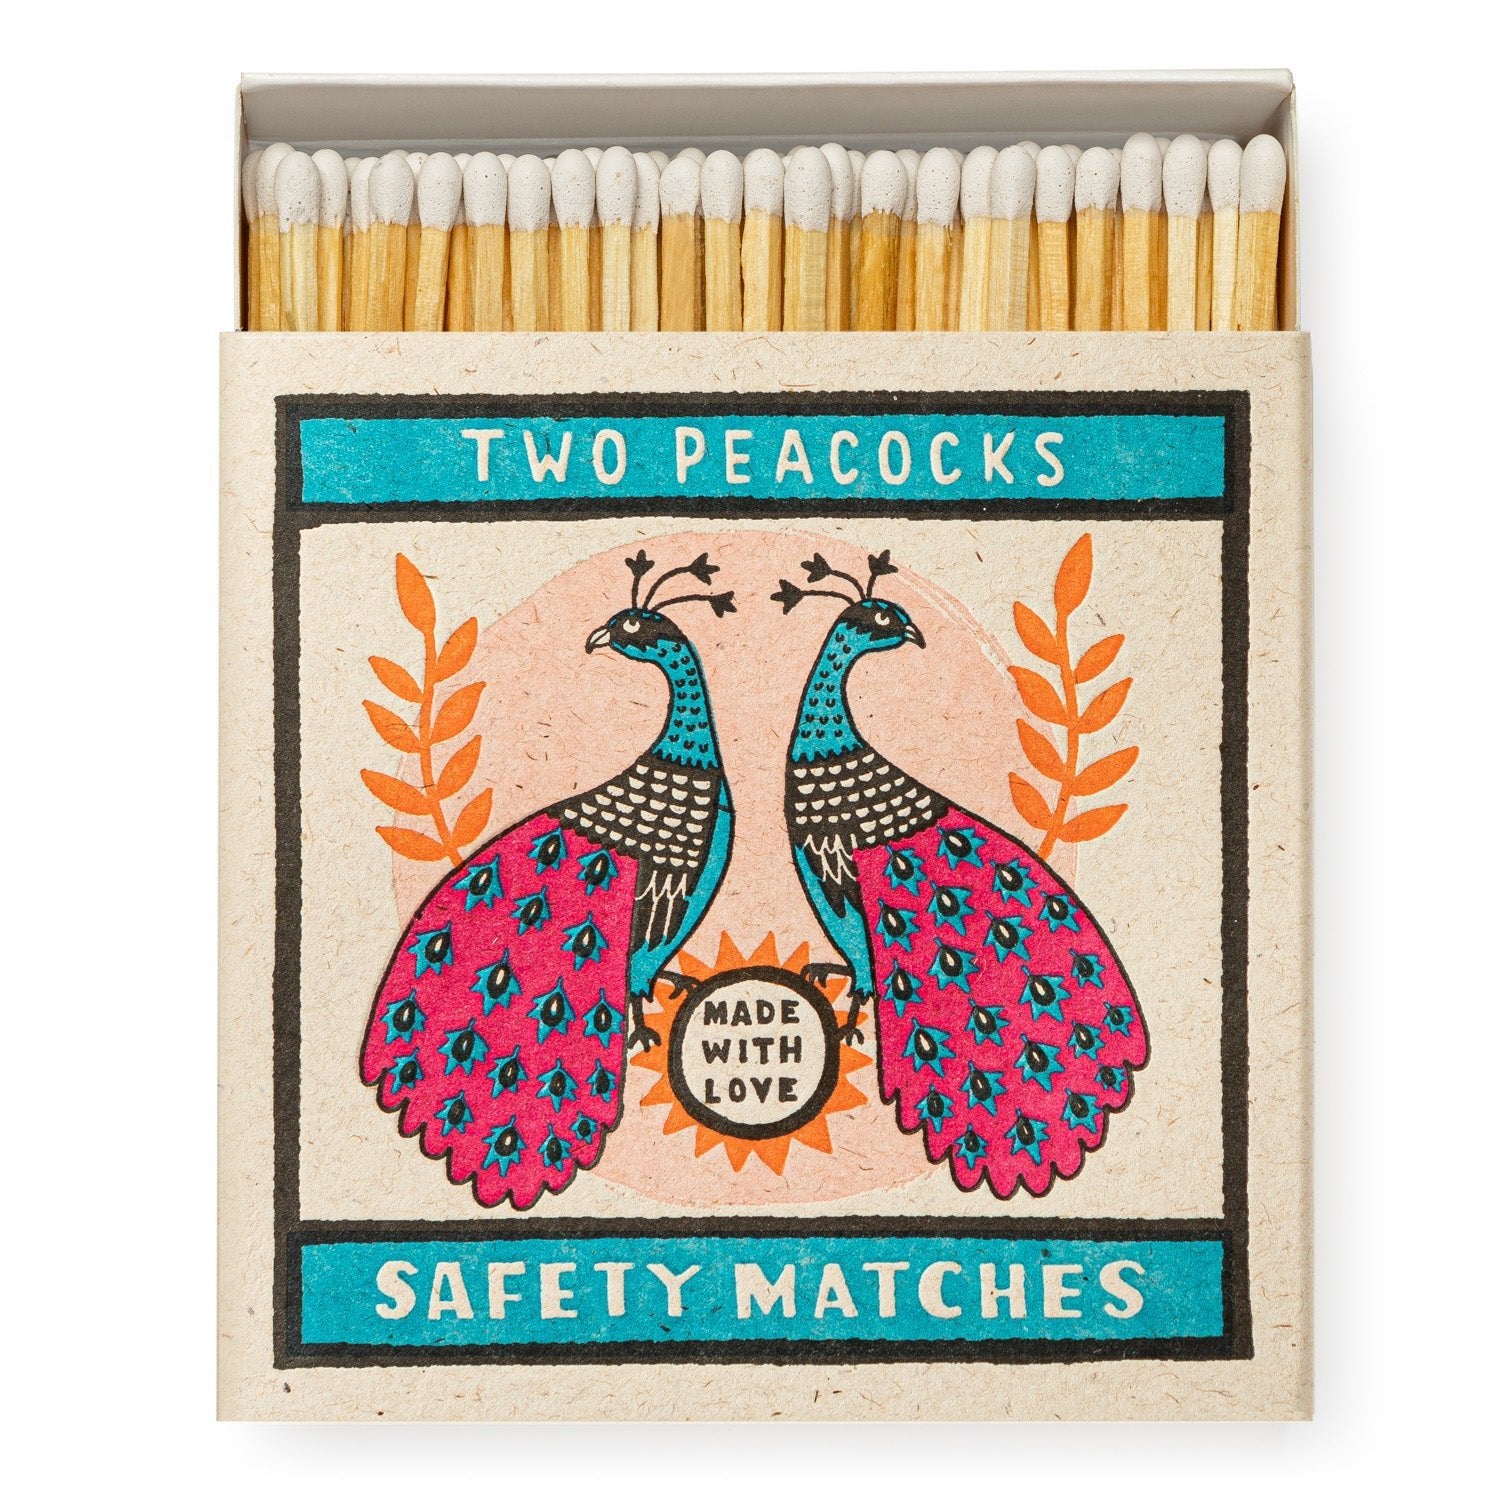 Luxury Matches - Two Peacocks - Life of Riley